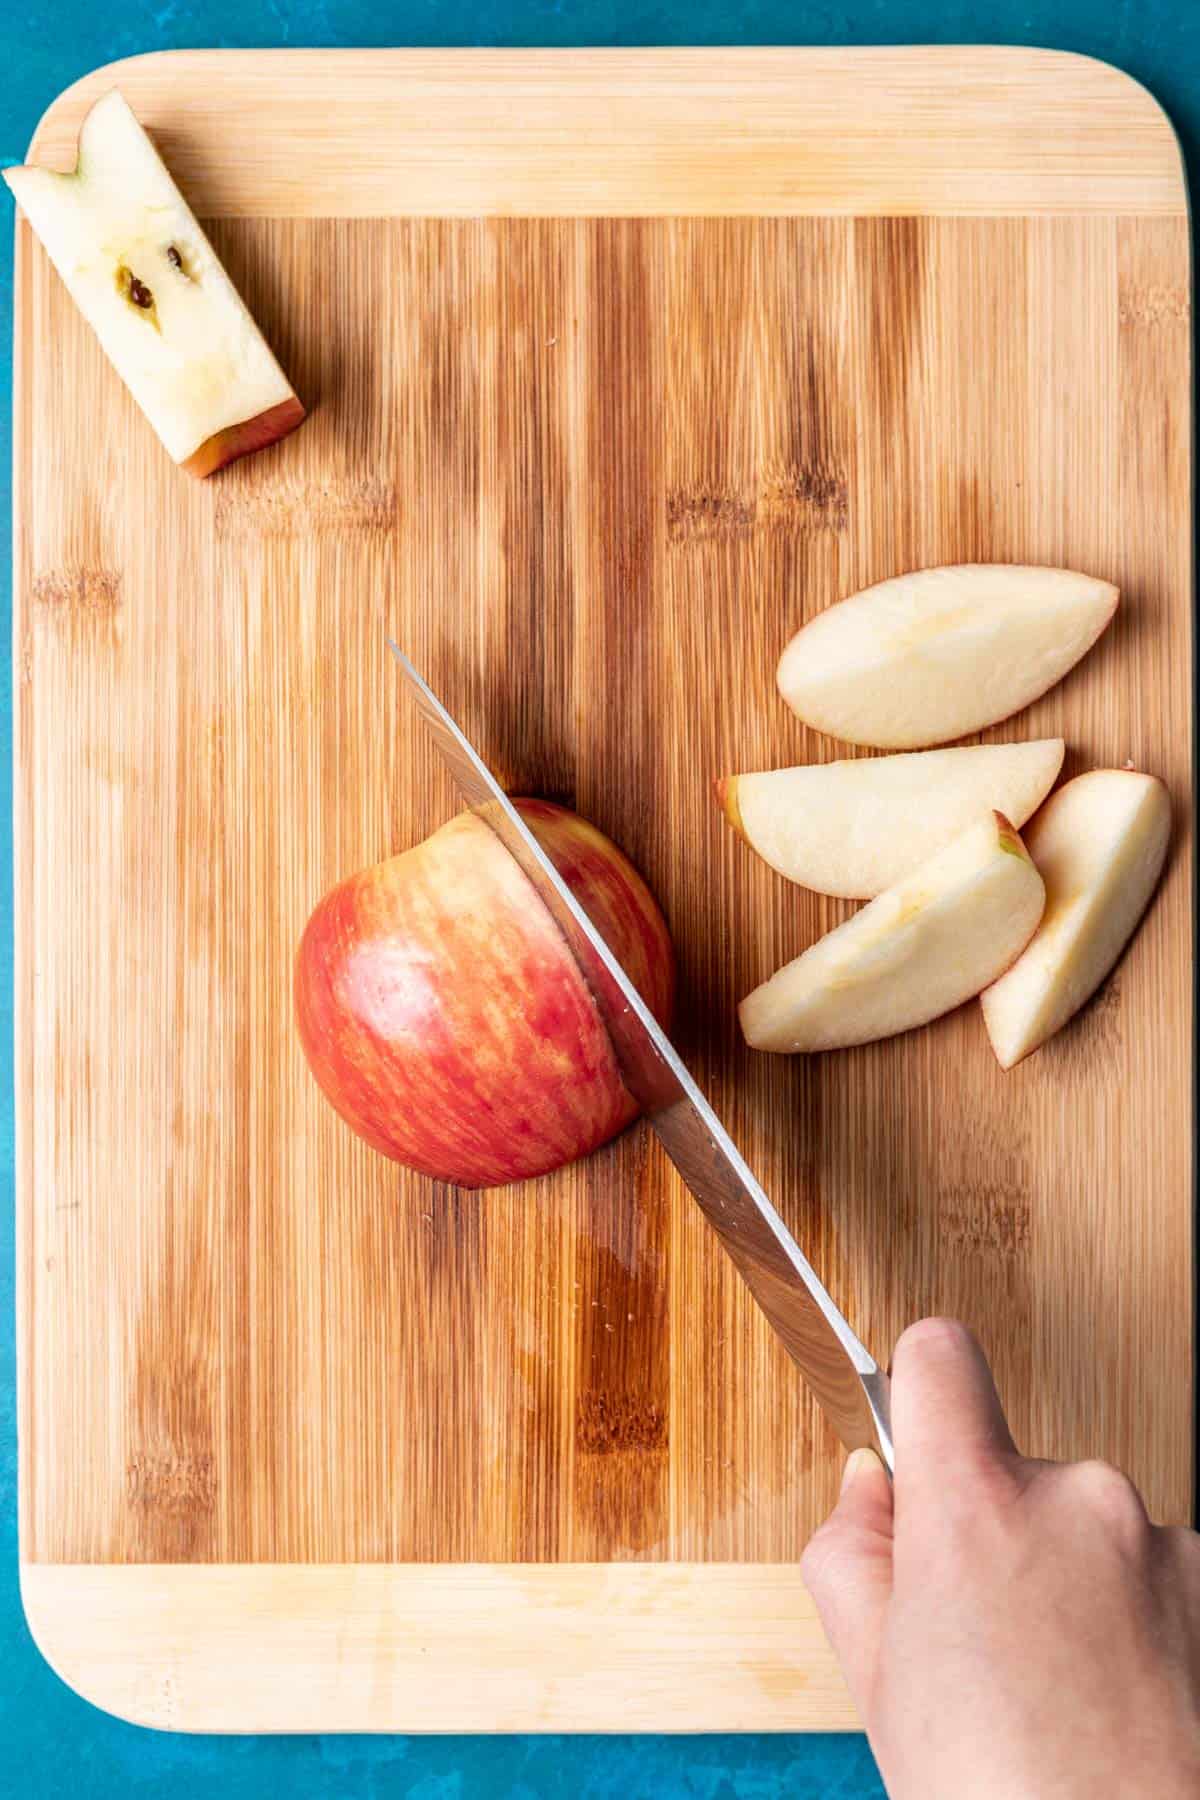 A knife cutting an apple into wedges.